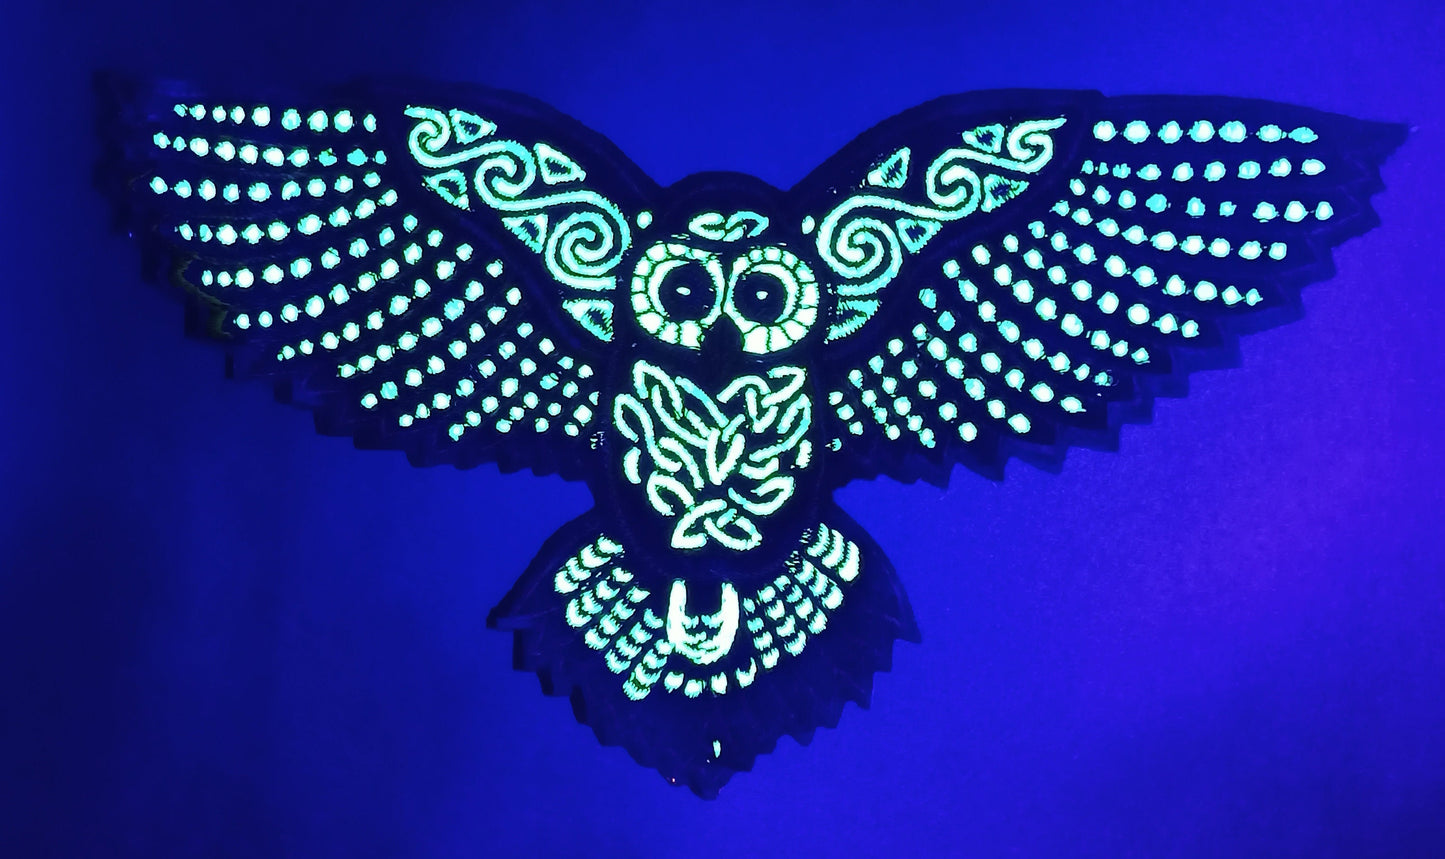 Celtic Owl Patch Embroidery with blacklight glowing UV colors - beautiful owl flies high and watches through the night of the magic forest